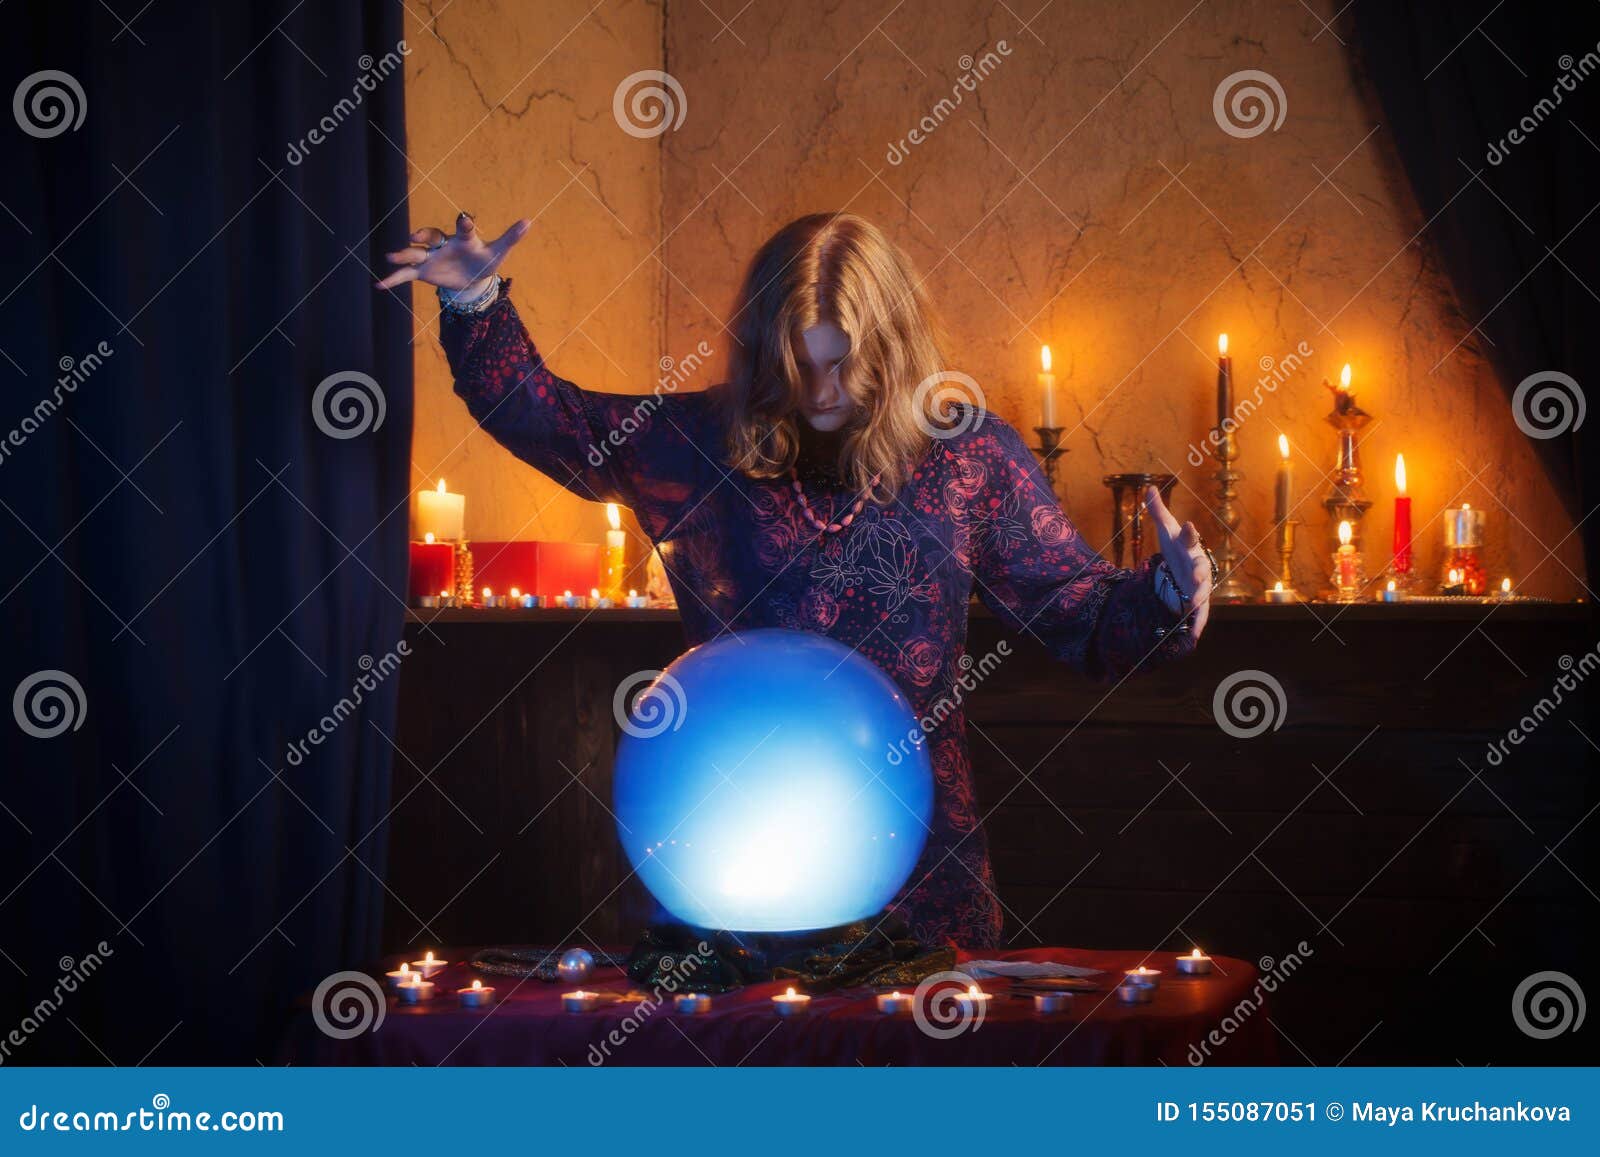 Young Witch with Illuminated Crystal Ball Stock Image - Image of